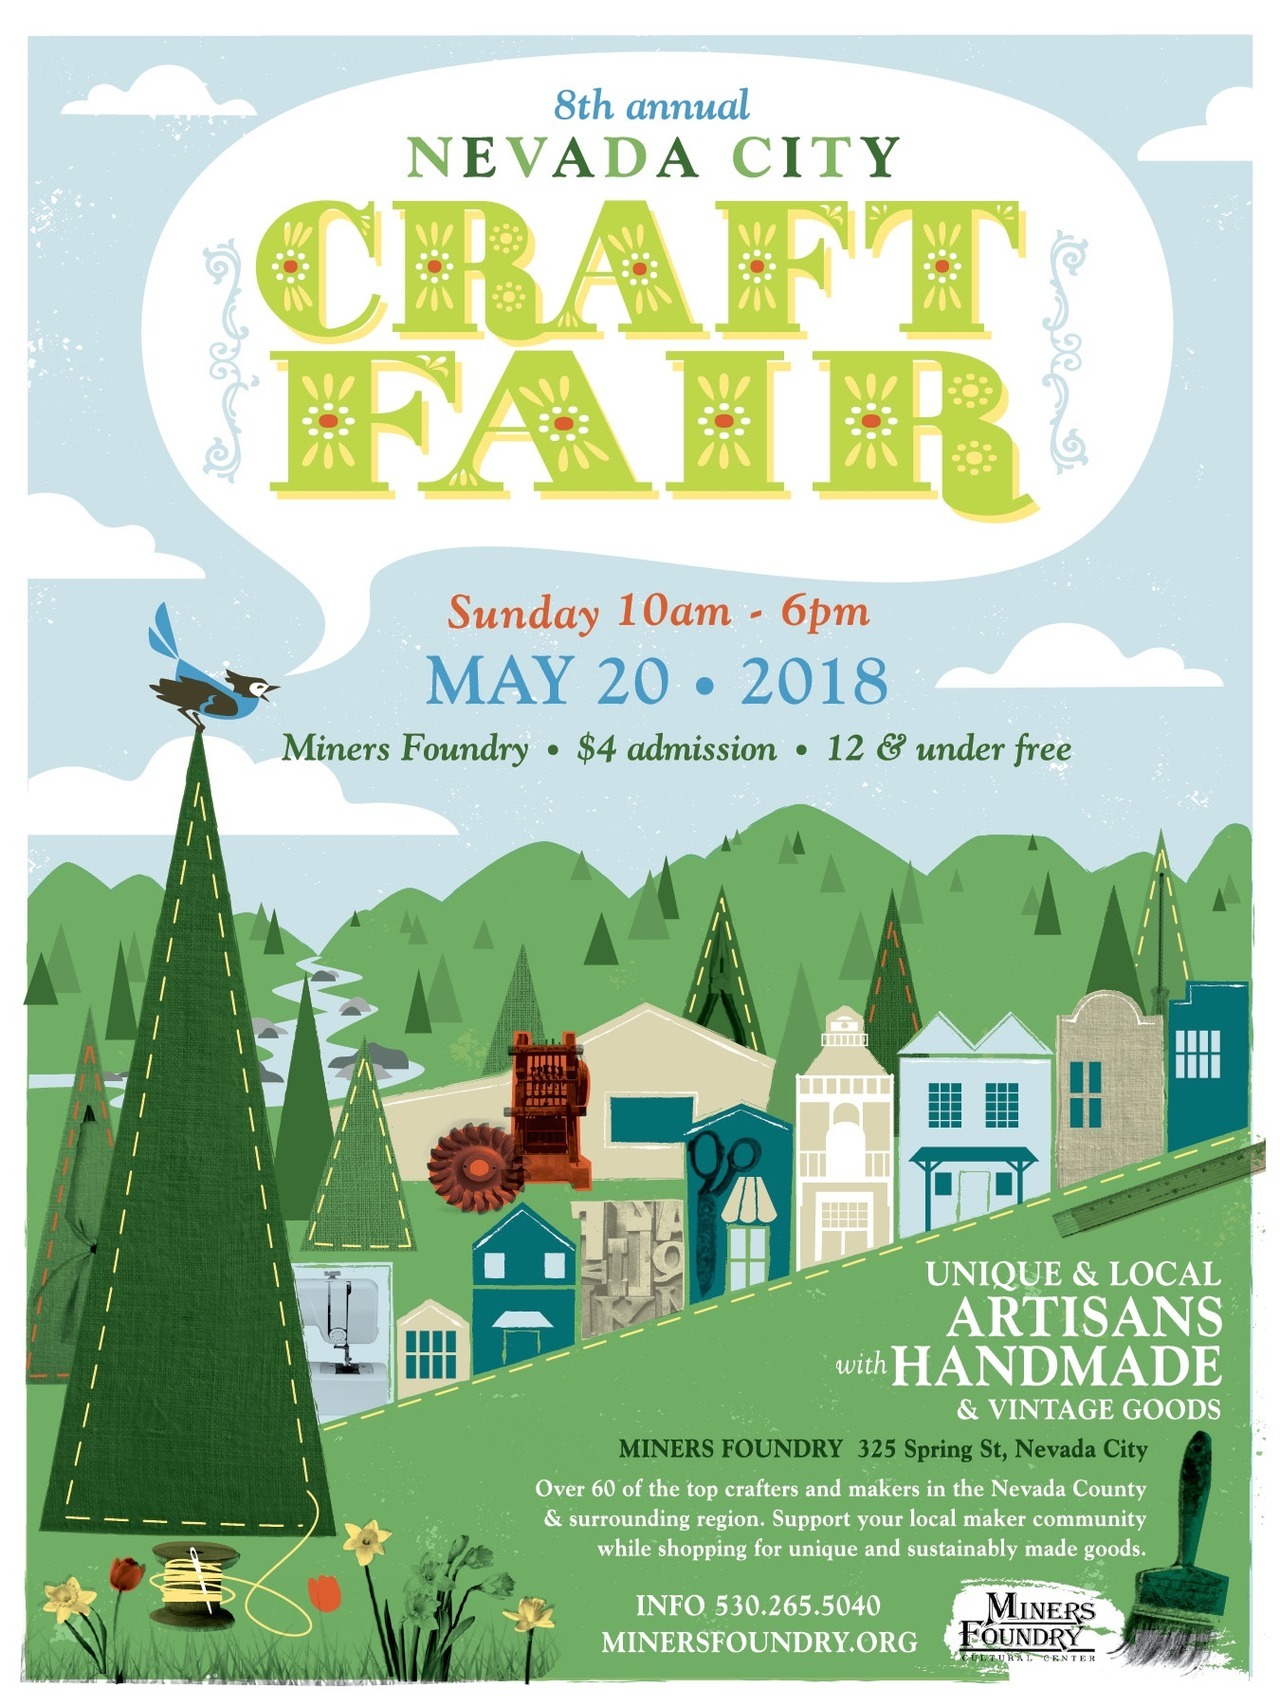 Nevada City Craft Fair — Nevada City Craft Fair is Today!! Come on down